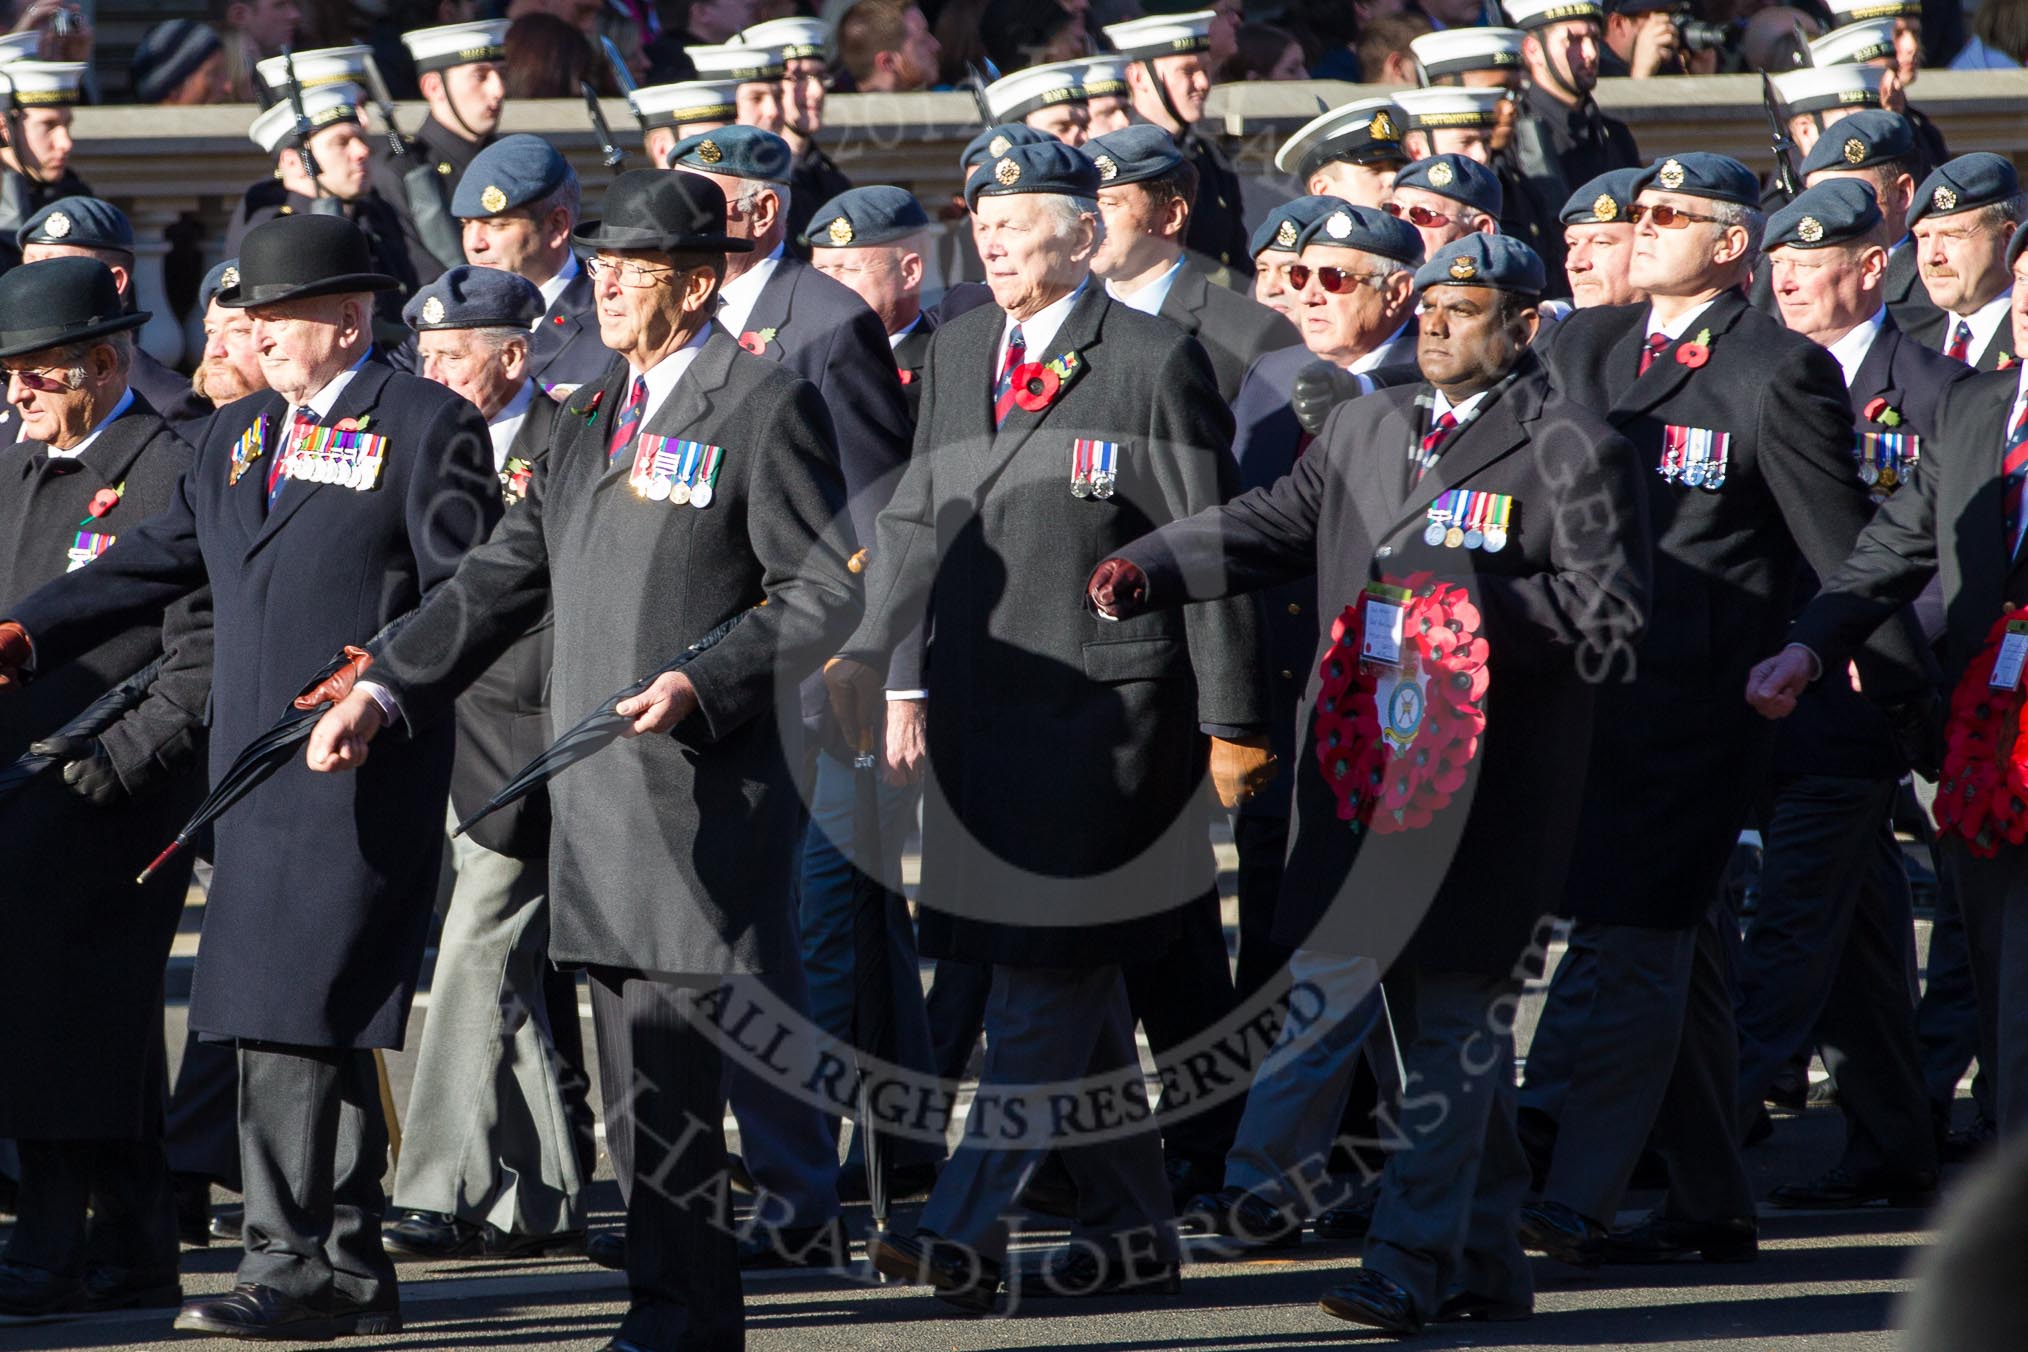 Remembrance Sunday 2012 Cenotaph March Past: Group C2 - Royal Air Force Regiment Association..
Whitehall, Cenotaph,
London SW1,

United Kingdom,
on 11 November 2012 at 12:00, image #1044